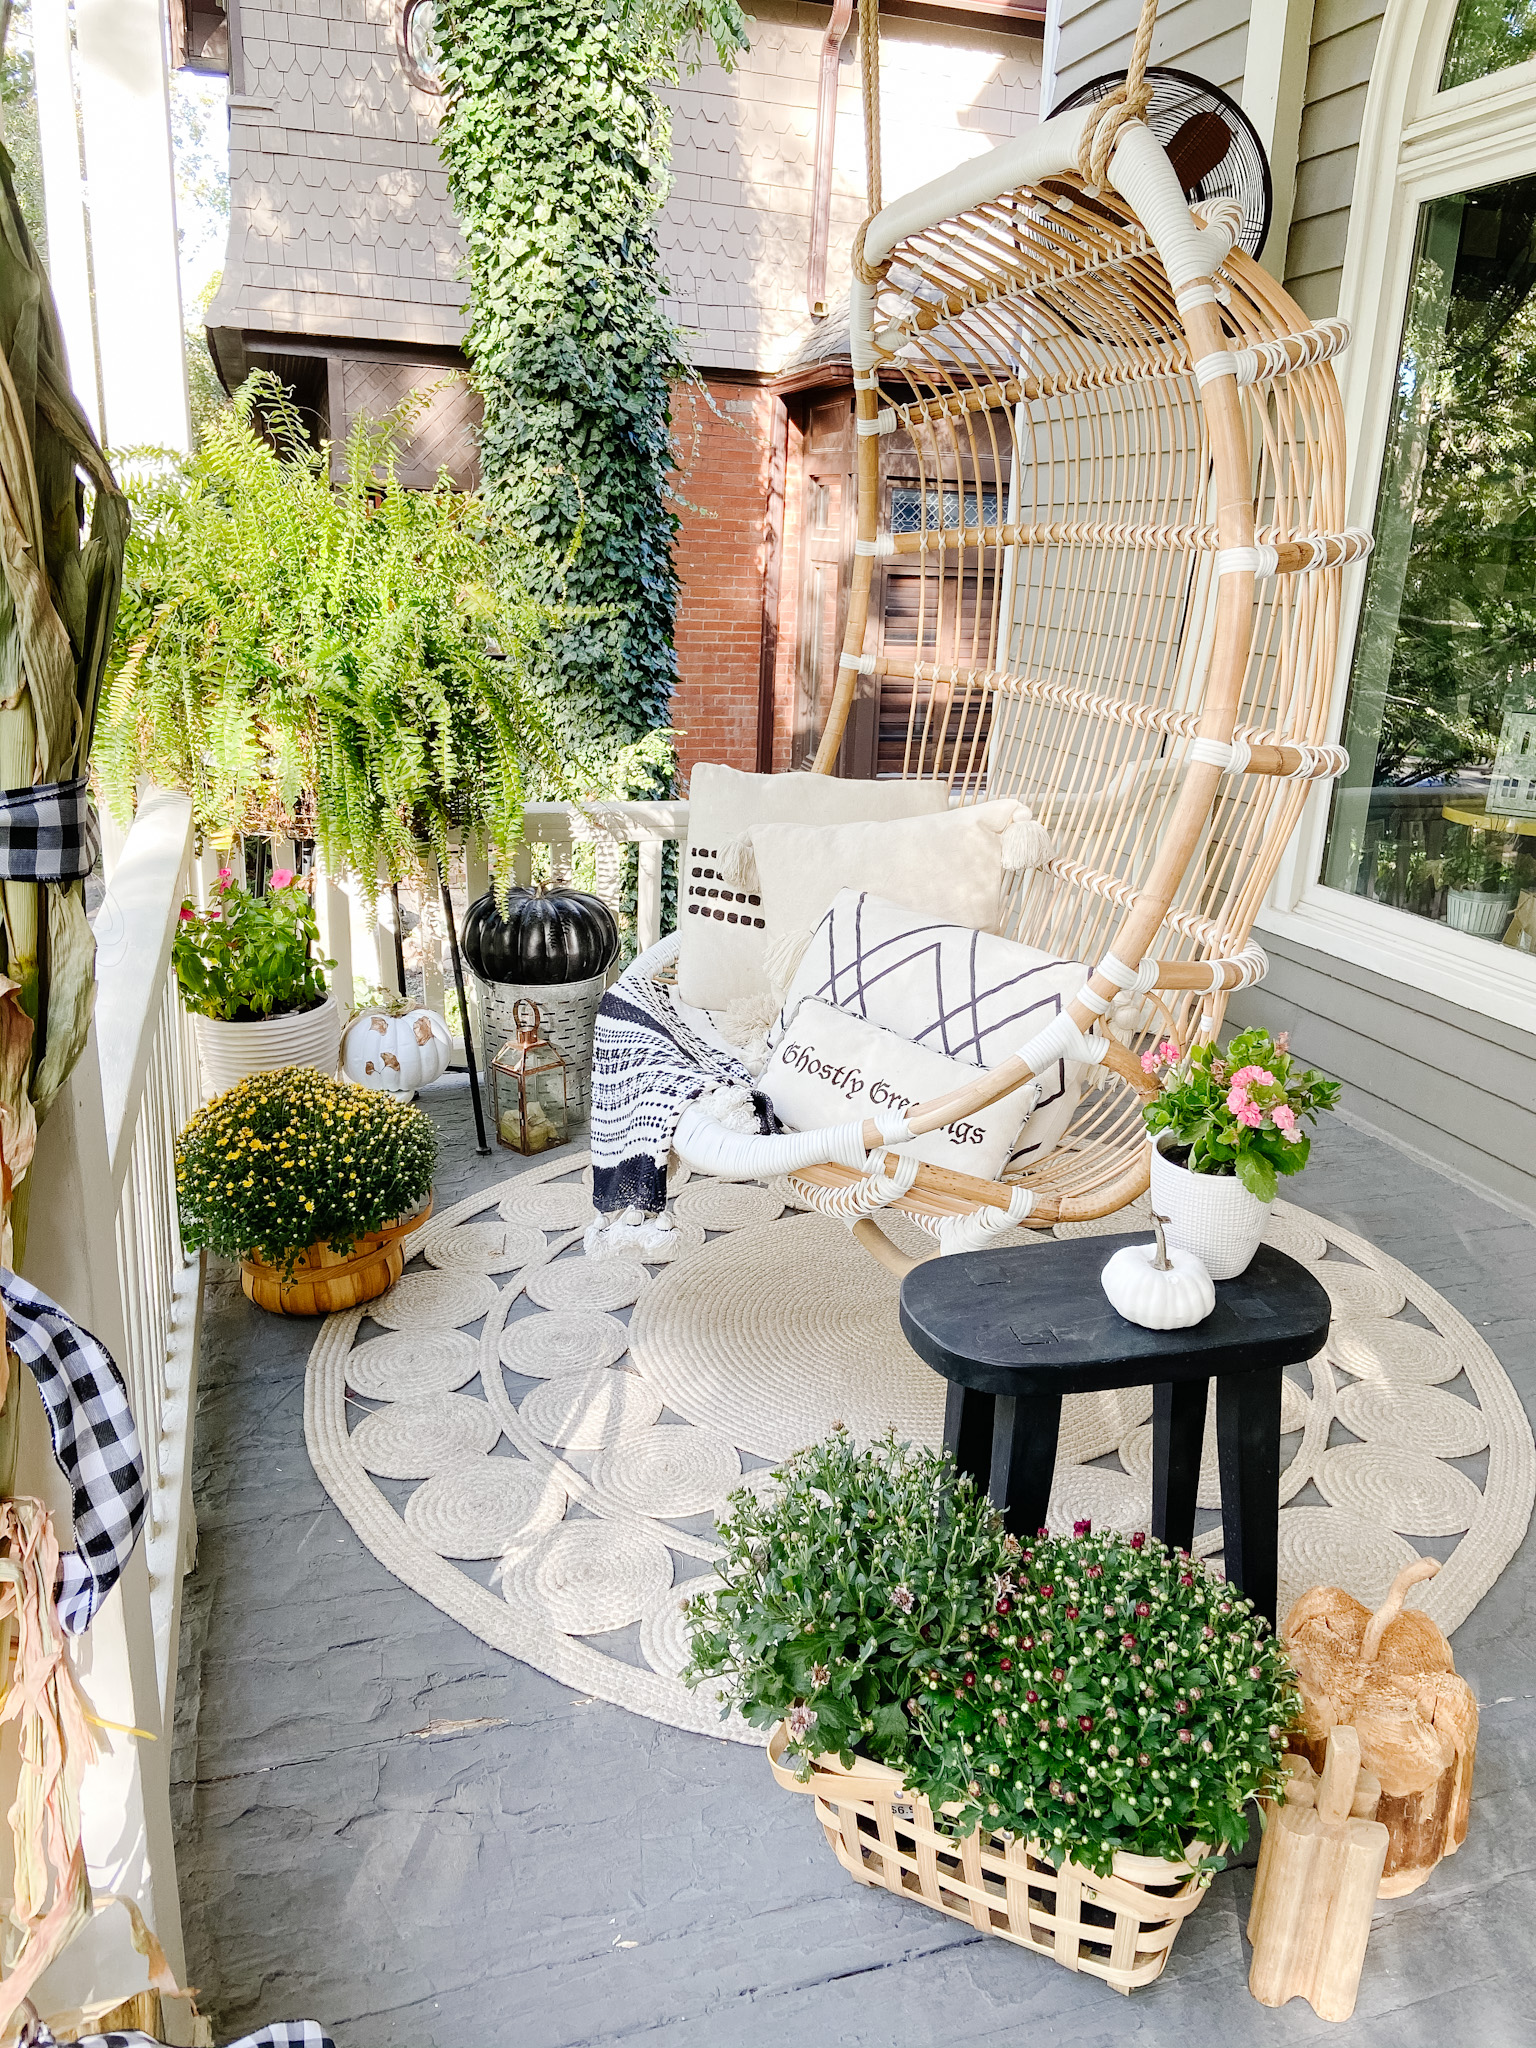 Boho Cottage Fall Porch Ideas. 5 Ways to Make an Outdoor Room for Fall. Use rattan furniture, potted flowers, pumpkins and cozy pillows to create a warm and welcoming fall porch. 